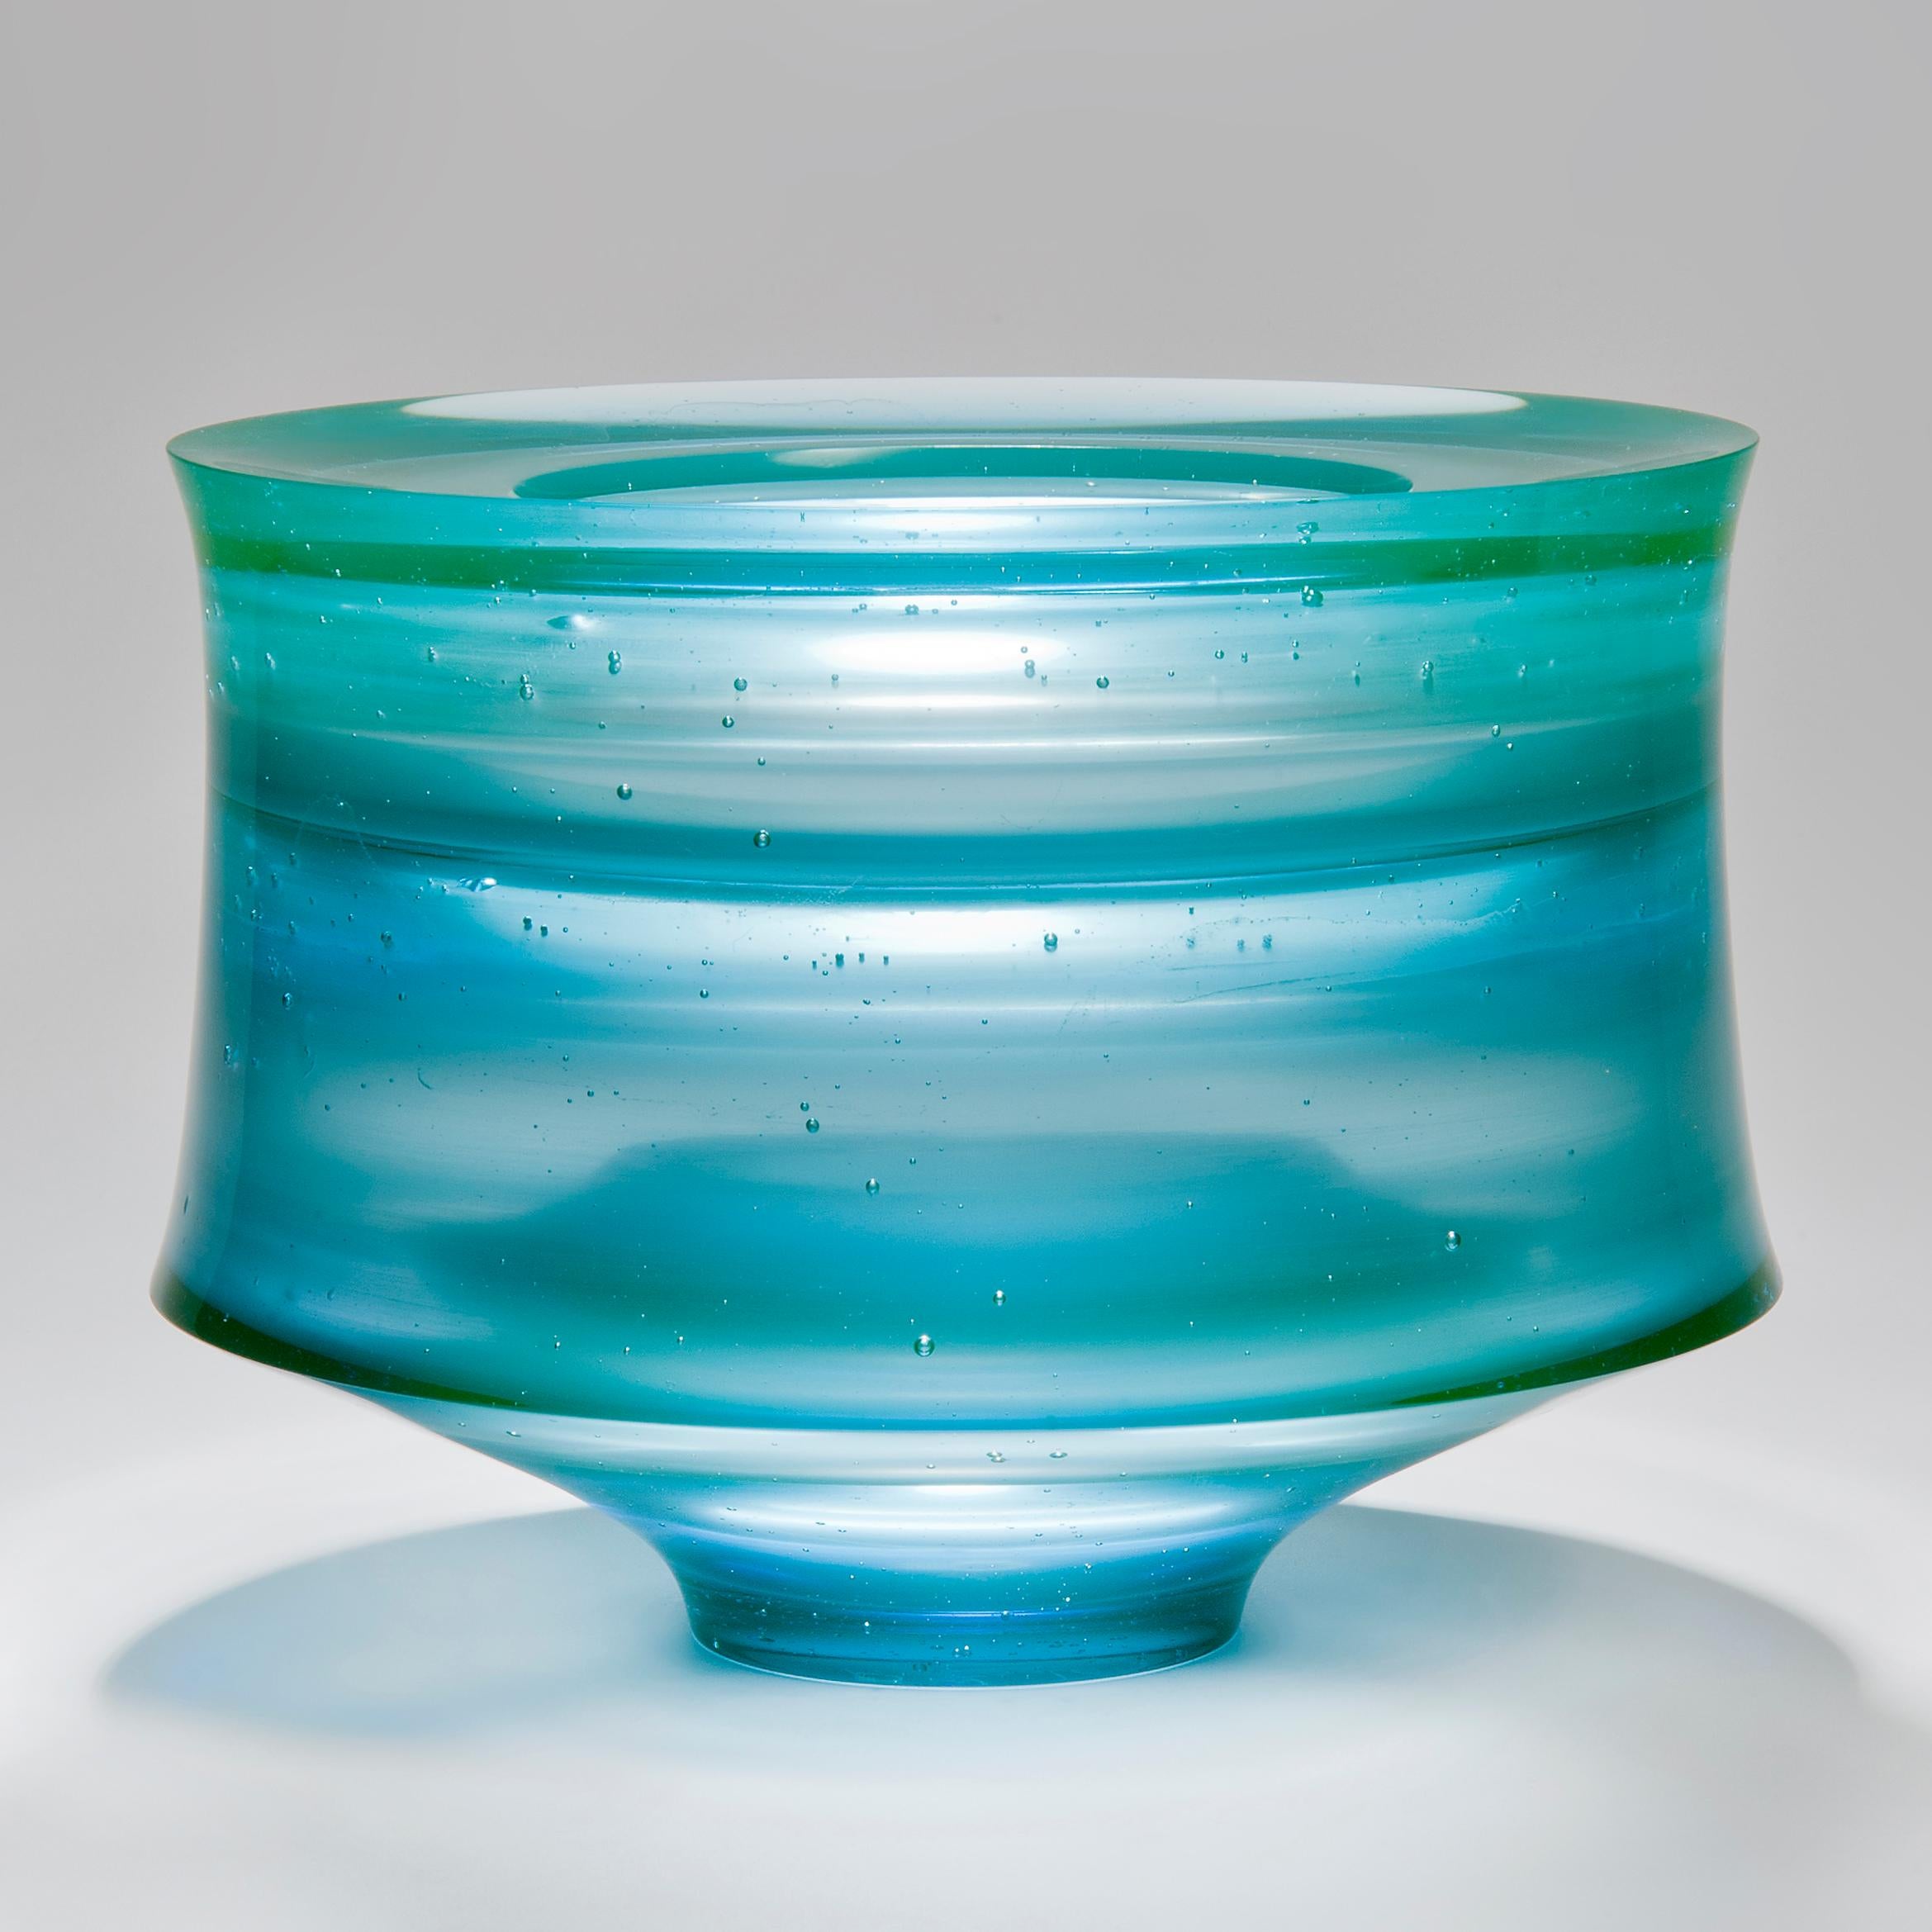 Corymb is a cast glass artwork in a beautiful soft aqua / turquoise blue by the British artist Paul Stopler. With a smooth exterior, the interior is stepped into sections by ridged protruding 